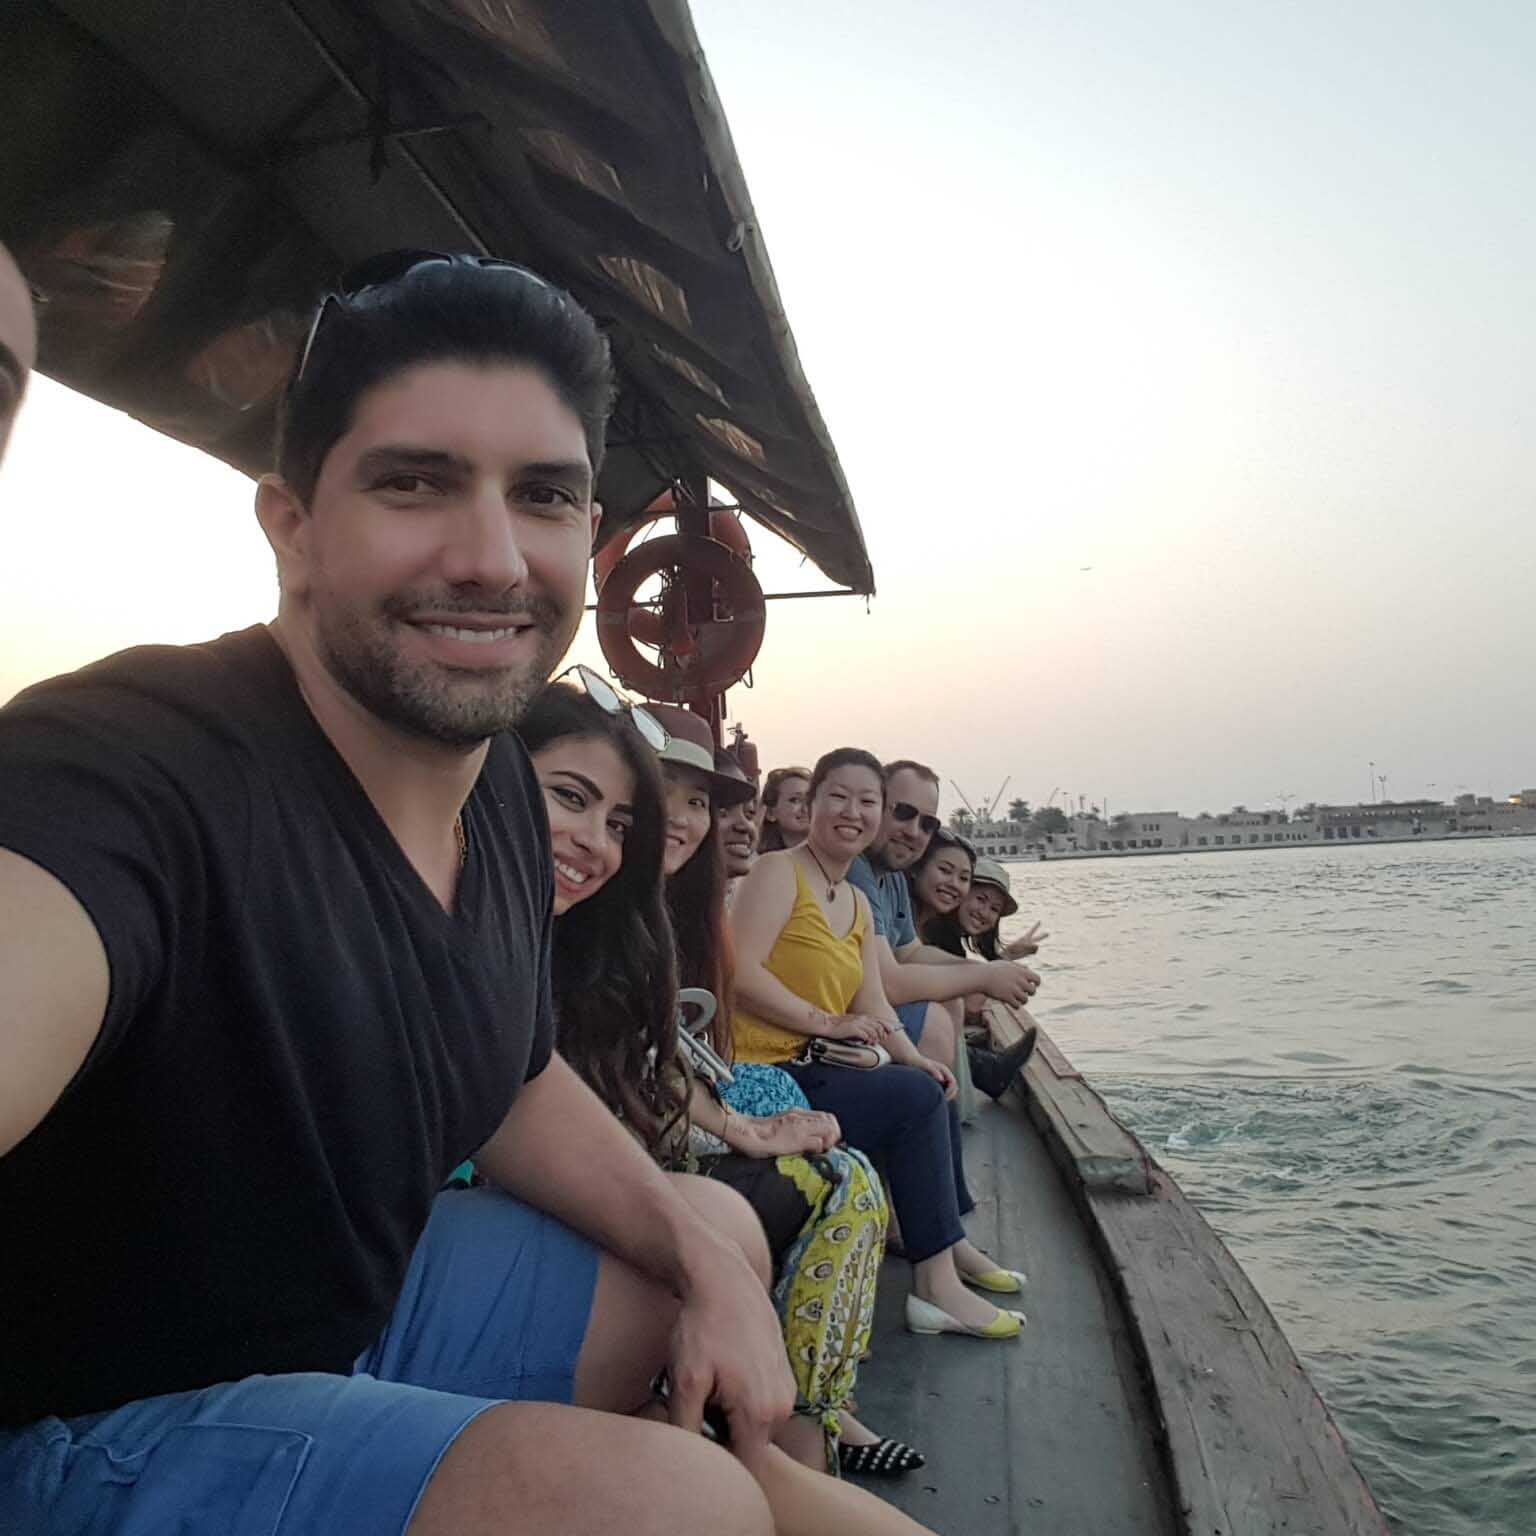 Students on a dhow river boat tour to the Deira Old Souk to visit the spice souk and the gold souk.